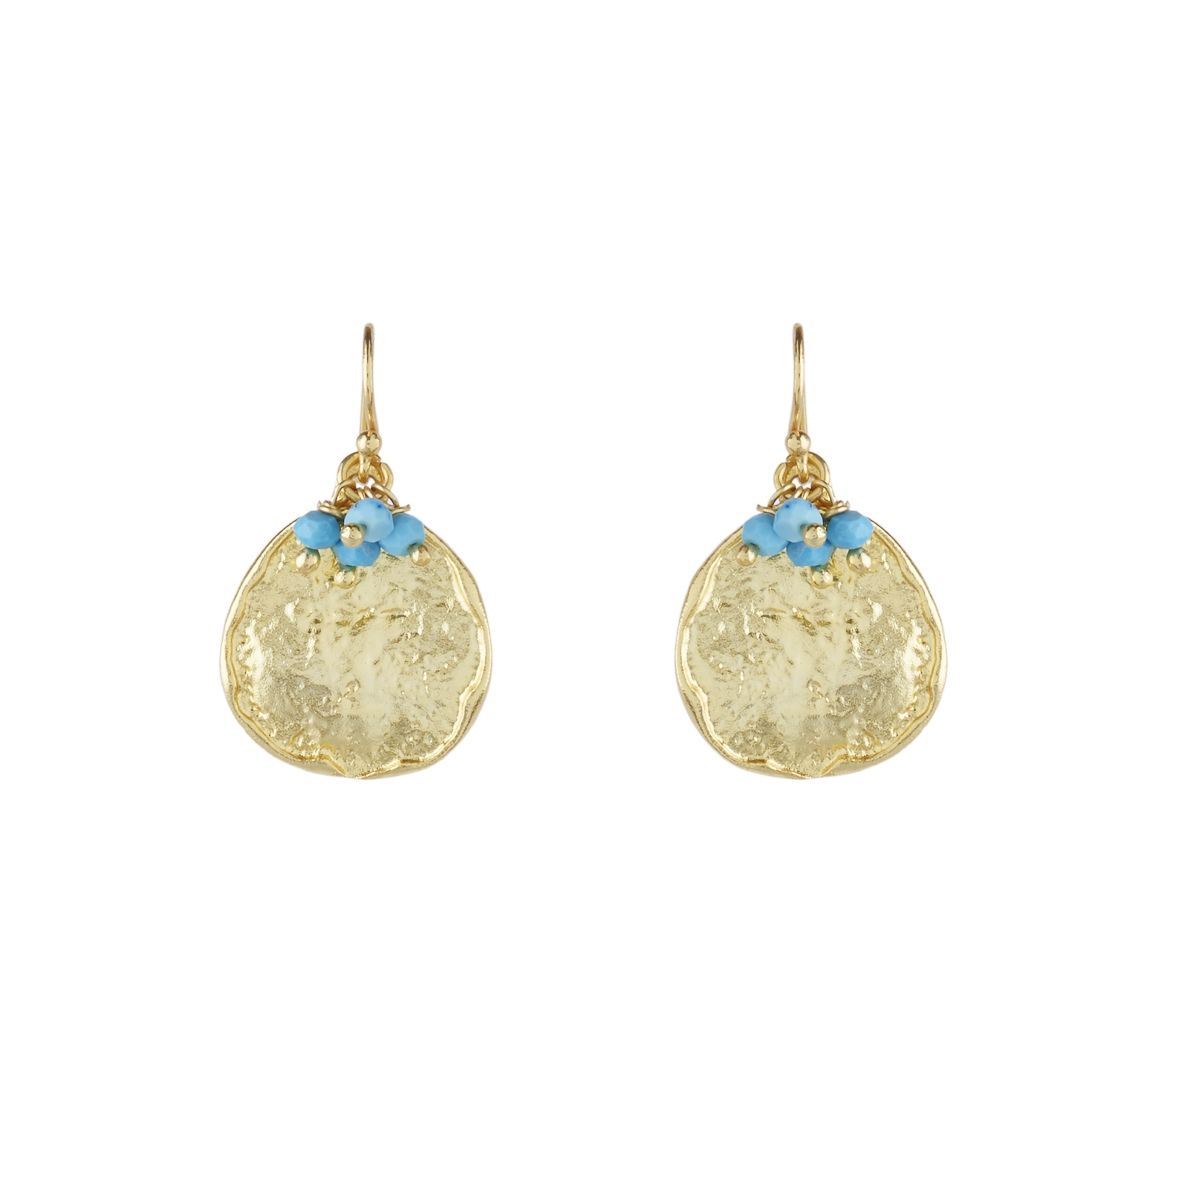 Gold and turqoise earrings